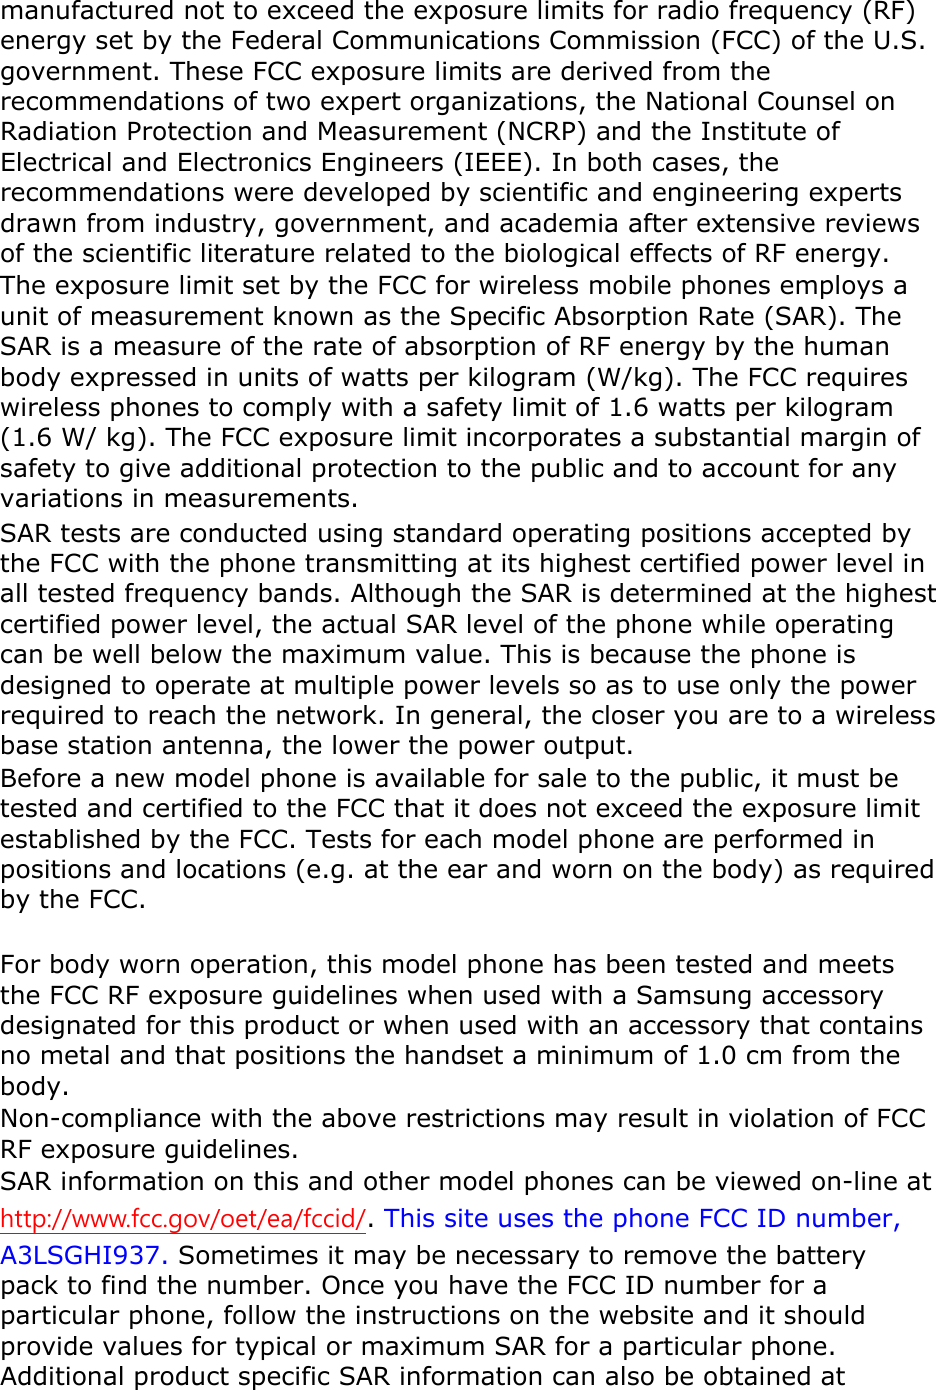 manufactured not to exceed the exposure limits for radio frequency (RF) energy set by the Federal Communications Commission (FCC) of the U.S. government. These FCC exposure limits are derived from the recommendations of two expert organizations, the National Counsel on Radiation Protection and Measurement (NCRP) and the Institute of Electrical and Electronics Engineers (IEEE). In both cases, the recommendations were developed by scientific and engineering experts drawn from industry, government, and academia after extensive reviews of the scientific literature related to the biological effects of RF energy. The exposure limit set by the FCC for wireless mobile phones employs a unit of measurement known as the Specific Absorption Rate (SAR). The SAR is a measure of the rate of absorption of RF energy by the human body expressed in units of watts per kilogram (W/kg). The FCC requires wireless phones to comply with a safety limit of 1.6 watts per kilogram (1.6 W/ kg). The FCC exposure limit incorporates a substantial margin of safety to give additional protection to the public and to account for any variations in measurements. SAR tests are conducted using standard operating positions accepted by the FCC with the phone transmitting at its highest certified power level in all tested frequency bands. Although the SAR is determined at the highest certified power level, the actual SAR level of the phone while operating can be well below the maximum value. This is because the phone is designed to operate at multiple power levels so as to use only the power required to reach the network. In general, the closer you are to a wireless base station antenna, the lower the power output. Before a new model phone is available for sale to the public, it must be tested and certified to the FCC that it does not exceed the exposure limit established by the FCC. Tests for each model phone are performed in positions and locations (e.g. at the ear and worn on the body) as required by the FCC.      For body worn operation, this model phone has been tested and meets the FCC RF exposure guidelines when used with a Samsung accessory designated for this product or when used with an accessory that contains no metal and that positions the handset a minimum of 1. cm from the body.  Non-compliance with the above restrictions may result in violation of FCC RF exposure guidelines. SAR information on this and other model phones can be viewed on-line at http://www.fcc.gov/oet/ea/fccid/. This site uses the phone FCC ID number, A3LSGHI937. Sometimes it may be necessary to remove the battery pack to find the number. Once you have the FCC ID number for a particular phone, follow the instructions on the website and it should provide values for typical or maximum SAR for a particular phone. Additional product specific SAR information can also be obtained at 